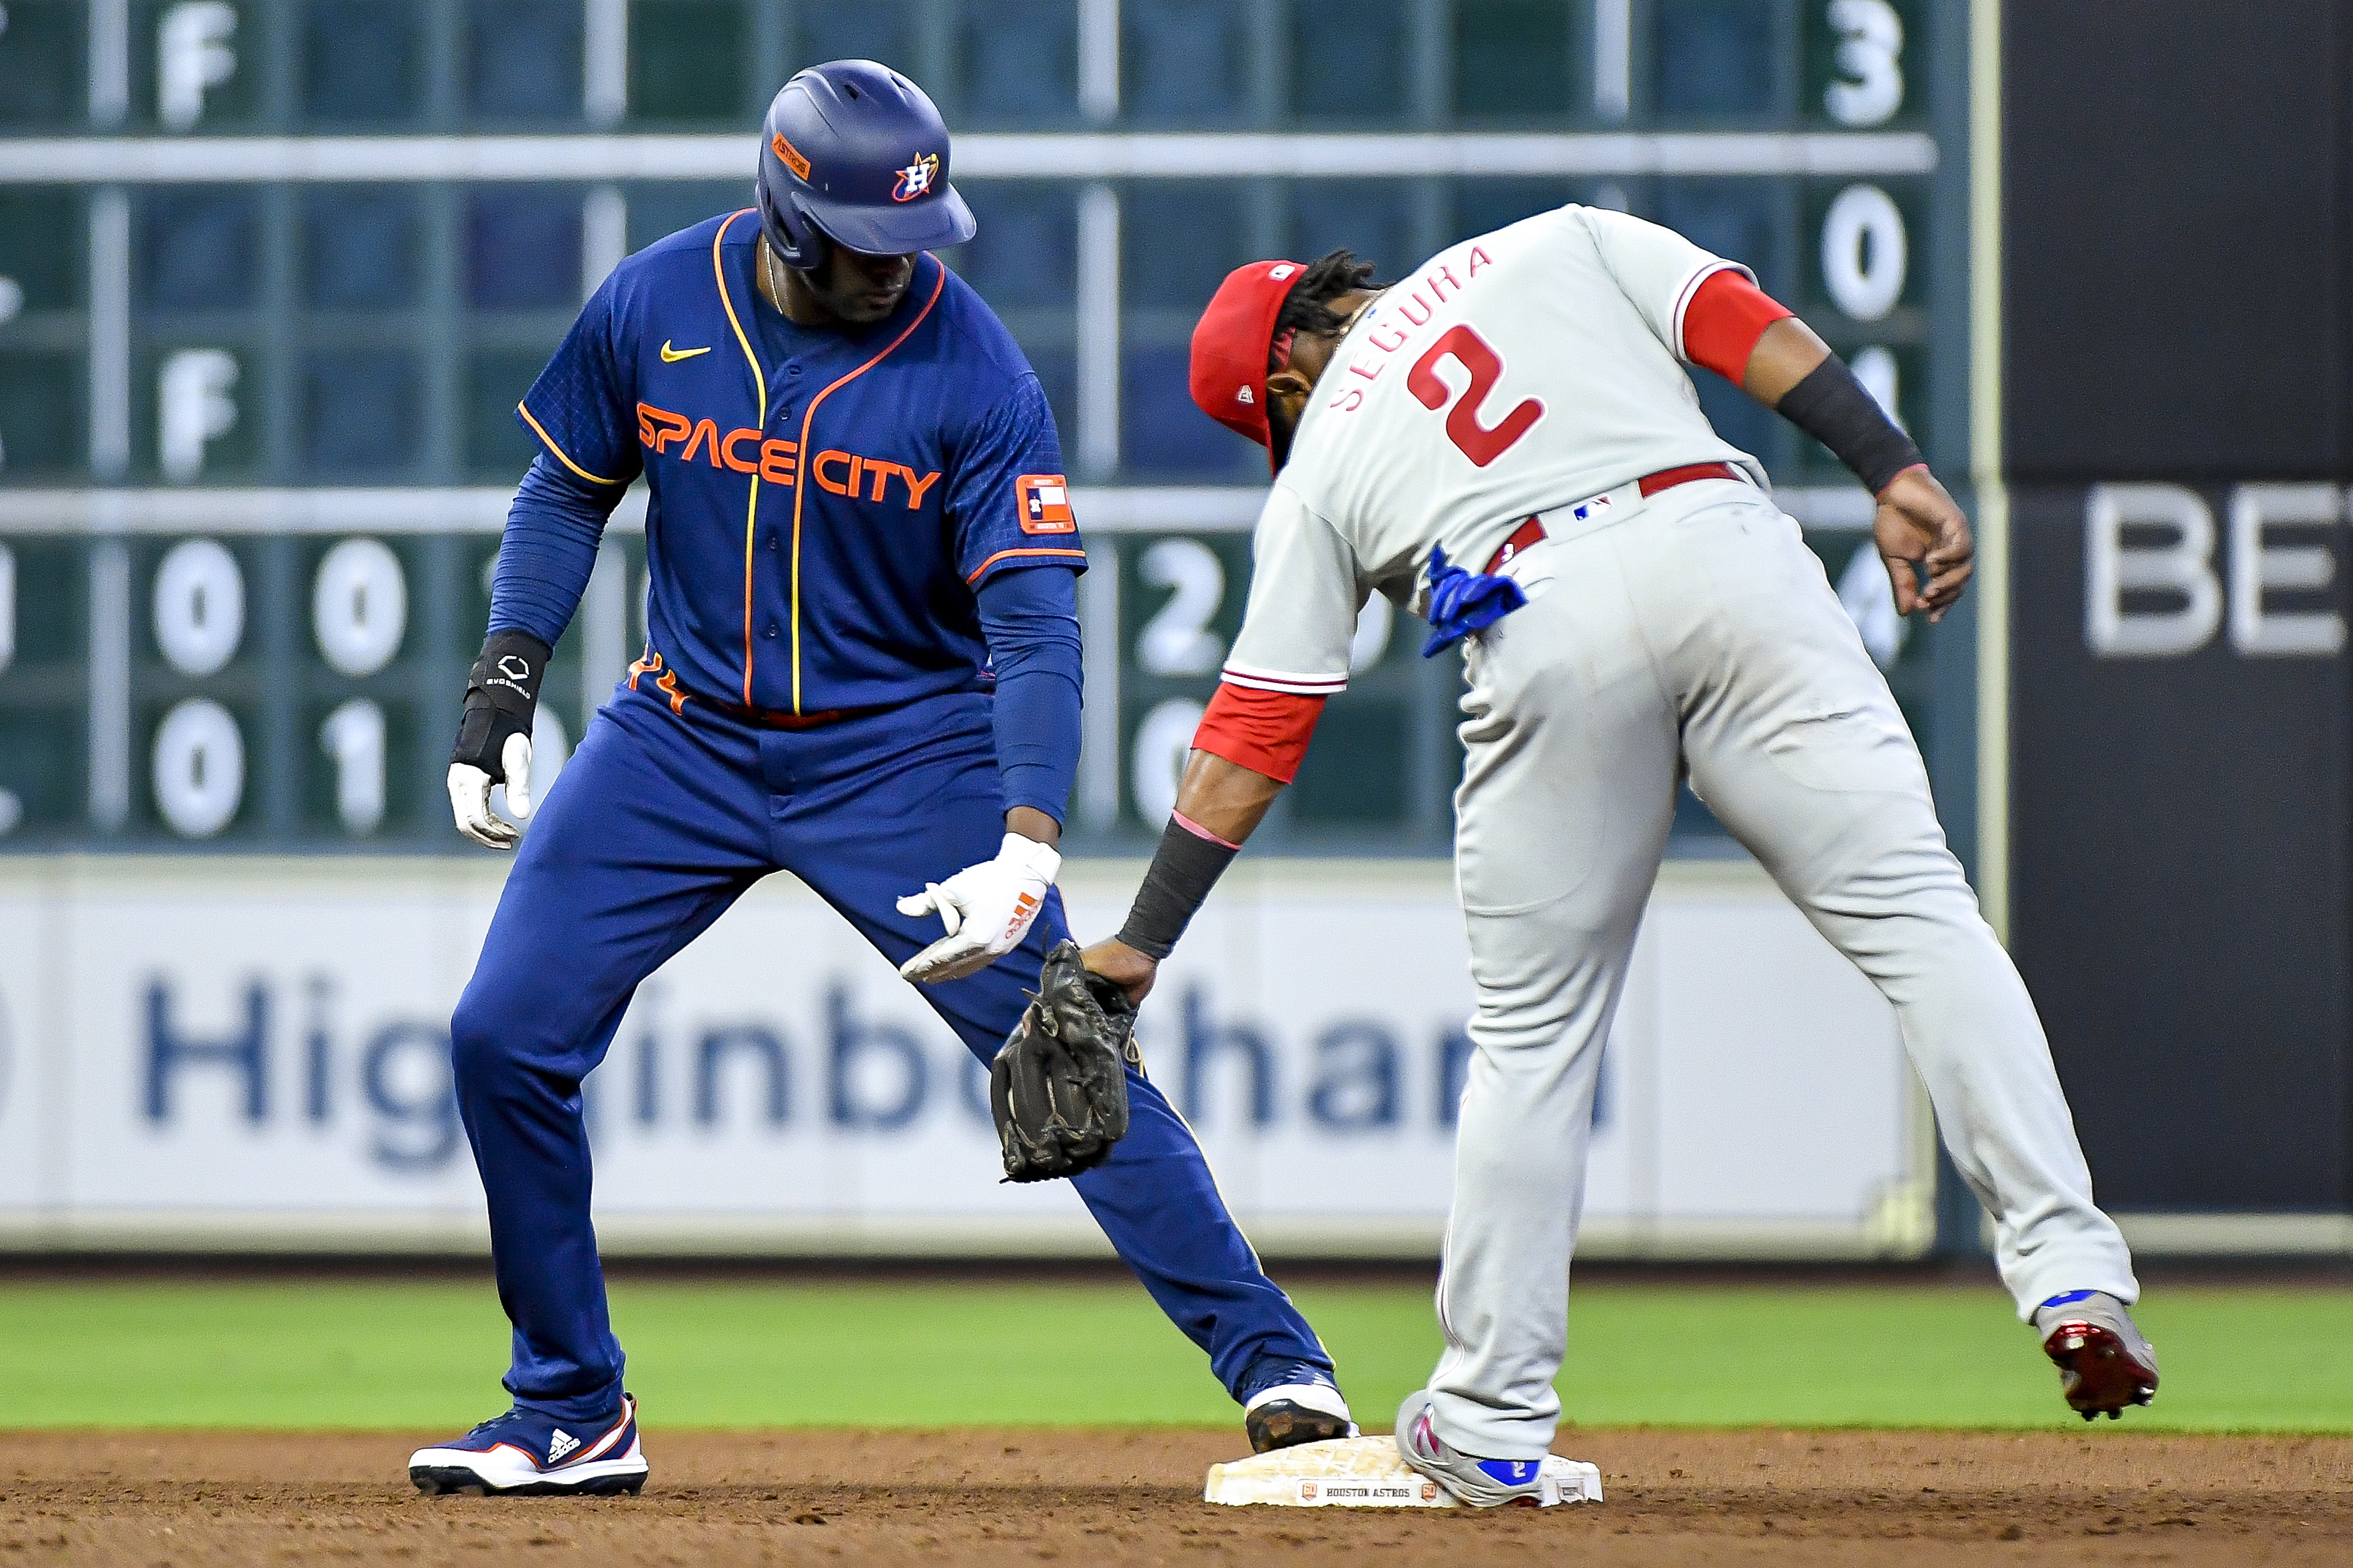 Phillies down Astros for 1st playoff berth since 2011